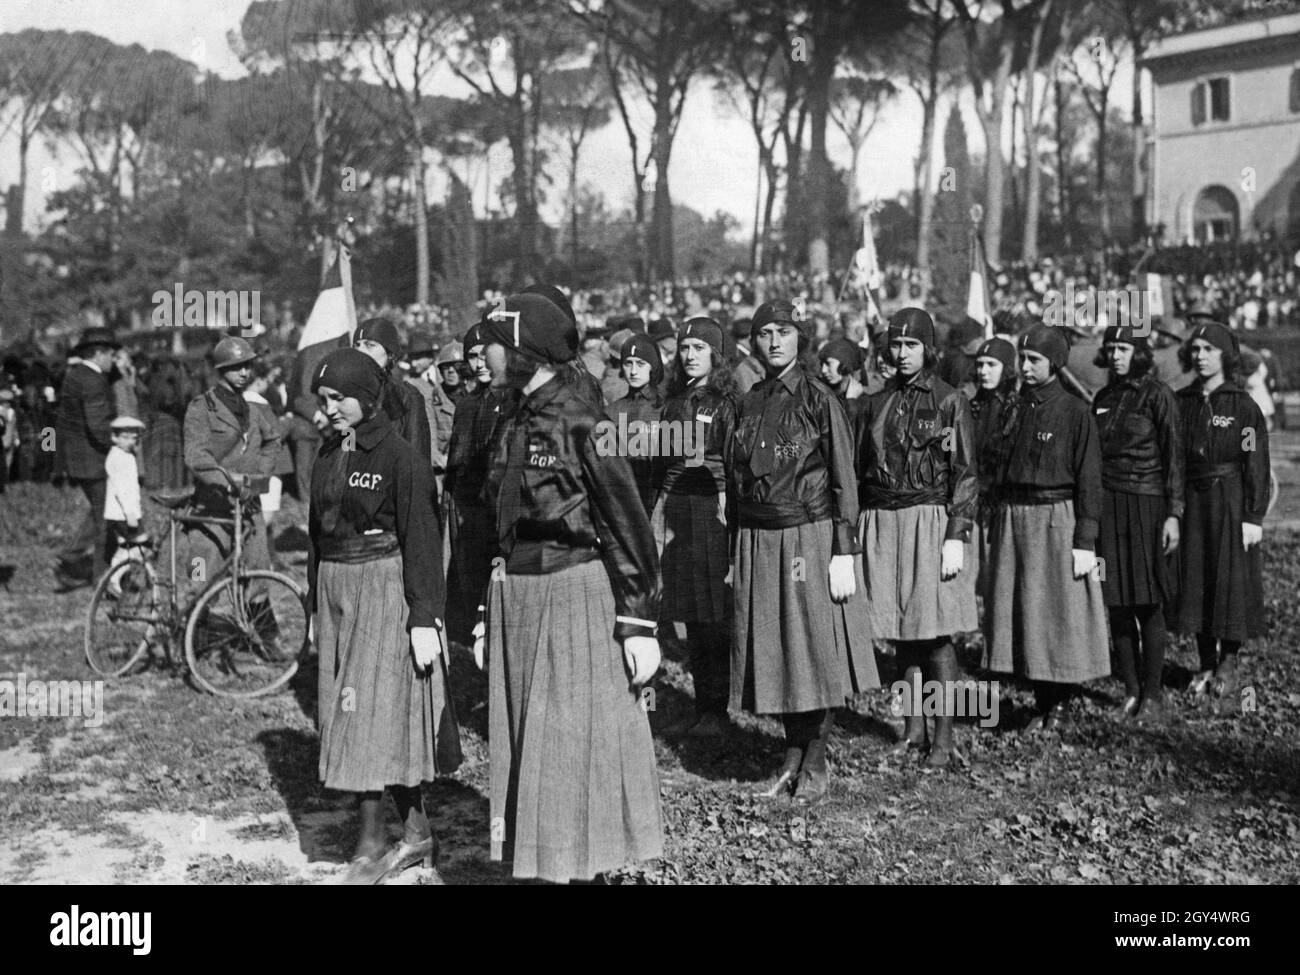 'On April 15, 1923, the Italian Fascists, who had been in power for only a few months, gathered for a large rally in the Piazza di Siena in the Villa Borghese Park in Rome, with their ''Duce'' Mussolini present. The picture shows a group of women on the sports field. By wearing black shirts (so-called black shirts) they express their sympathy for the fascist ideology. In the background on the right is the Casino dell'orologio. [automated translation]' Stock Photo